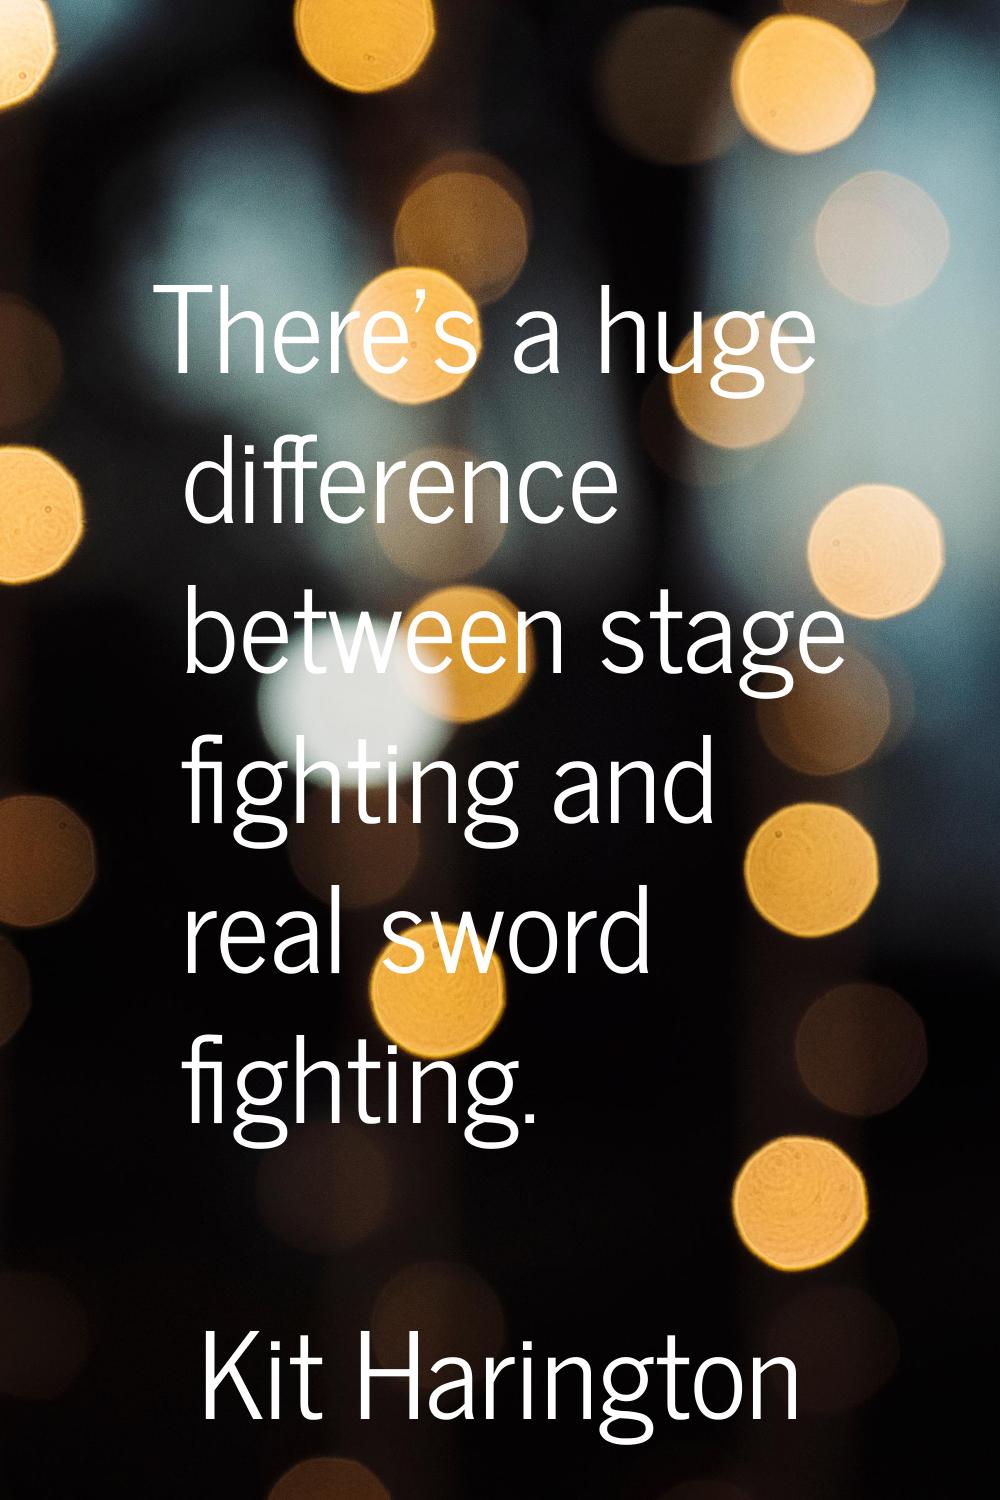 There's a huge difference between stage fighting and real sword fighting.